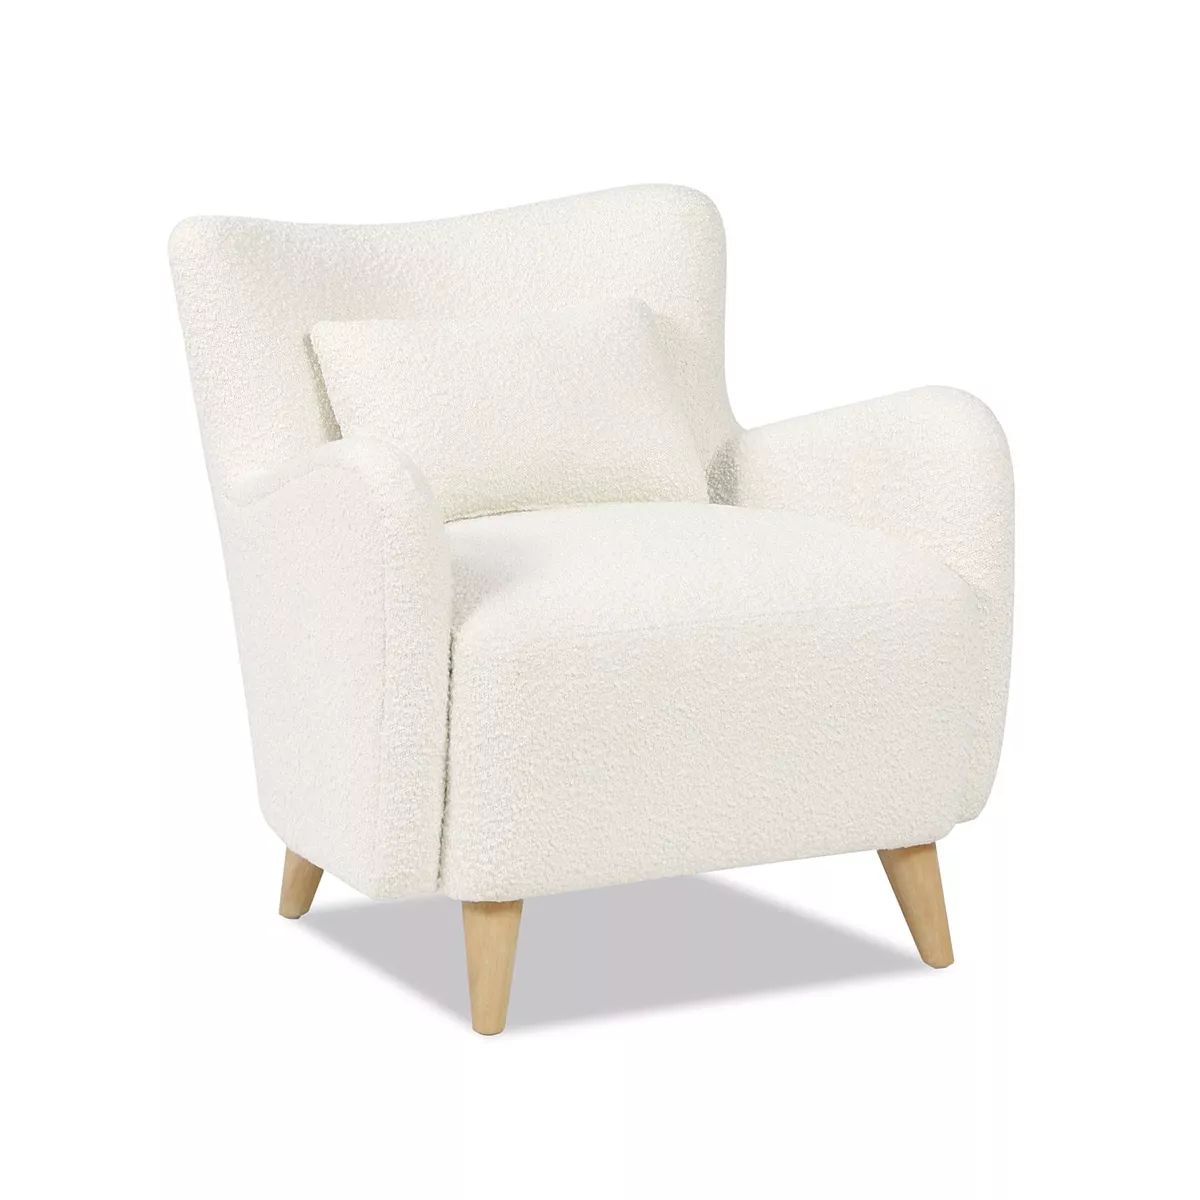 Lune 30" Curved Arm Accent Chair with Lumbar Pillow, Ivory White Boucle | Target